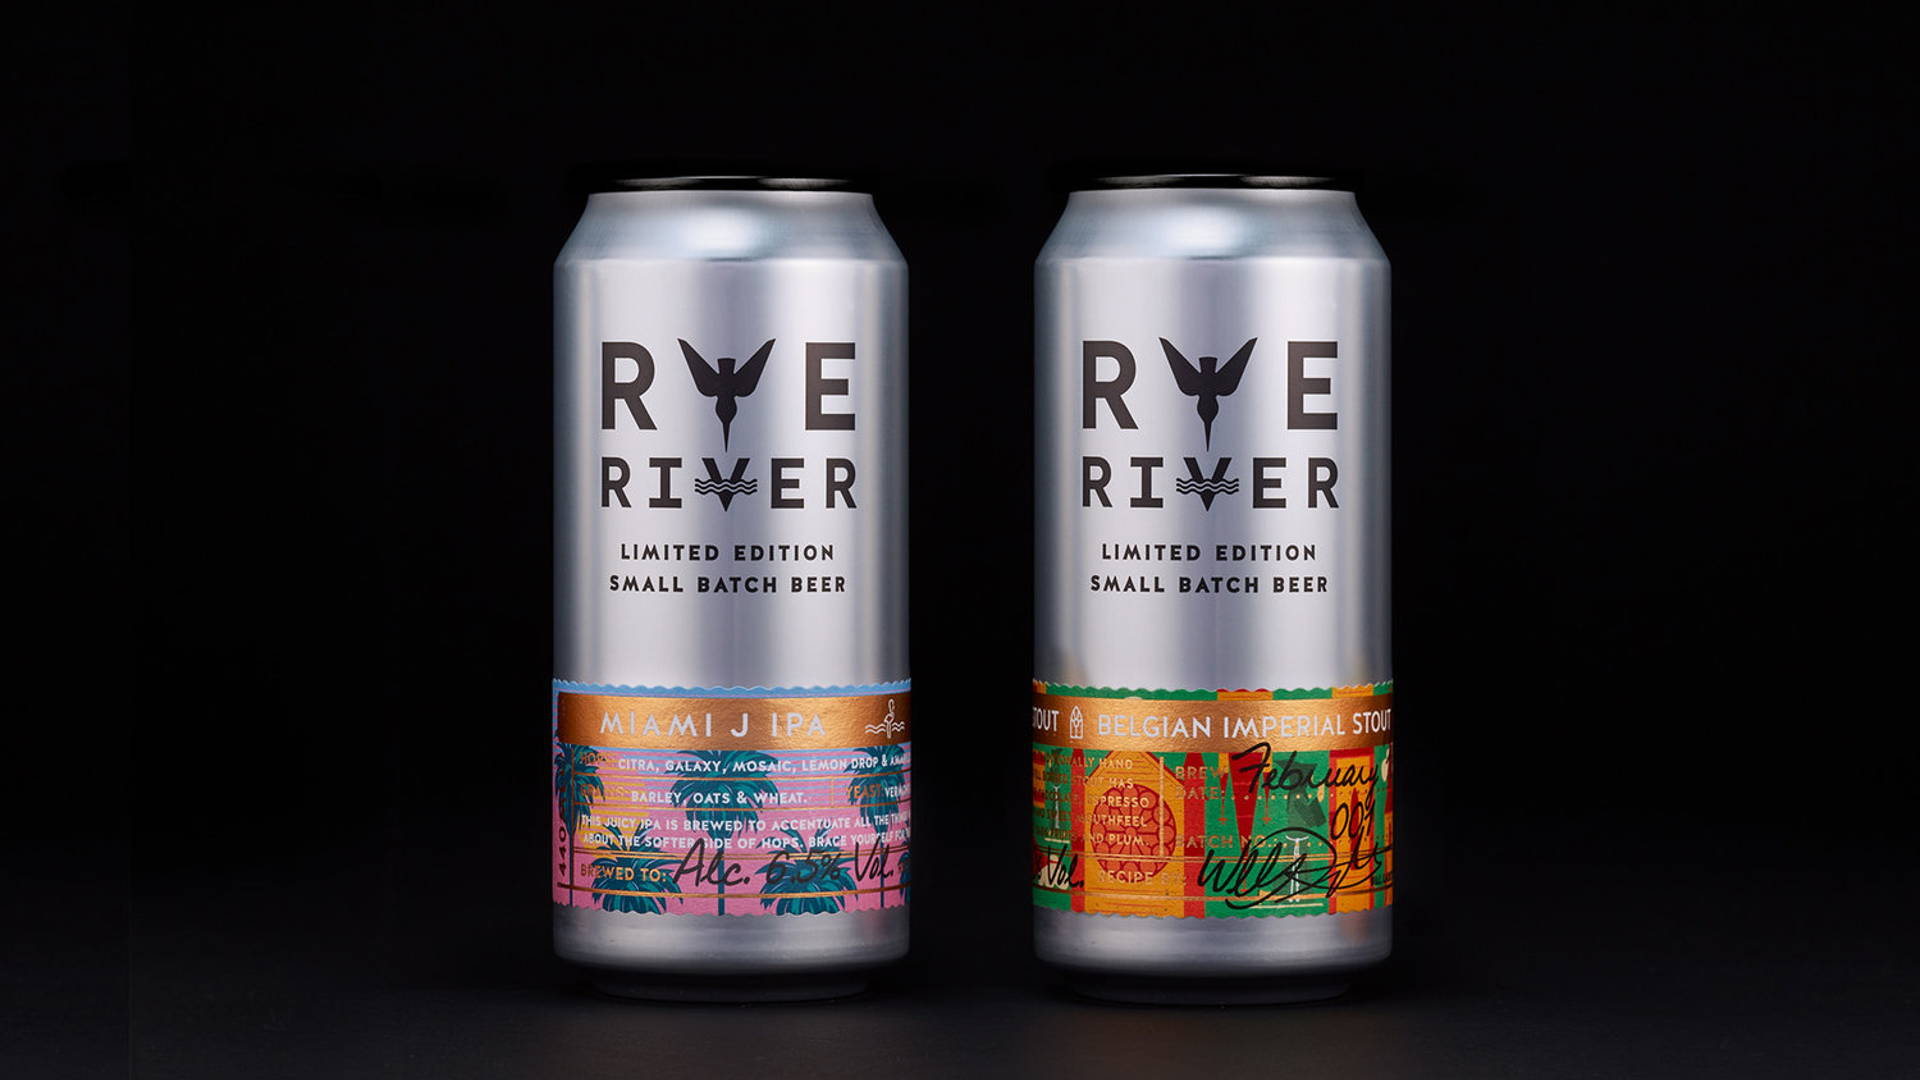 Featured image for Rye River Limited Edition Beers Seeks Inspiration From Location